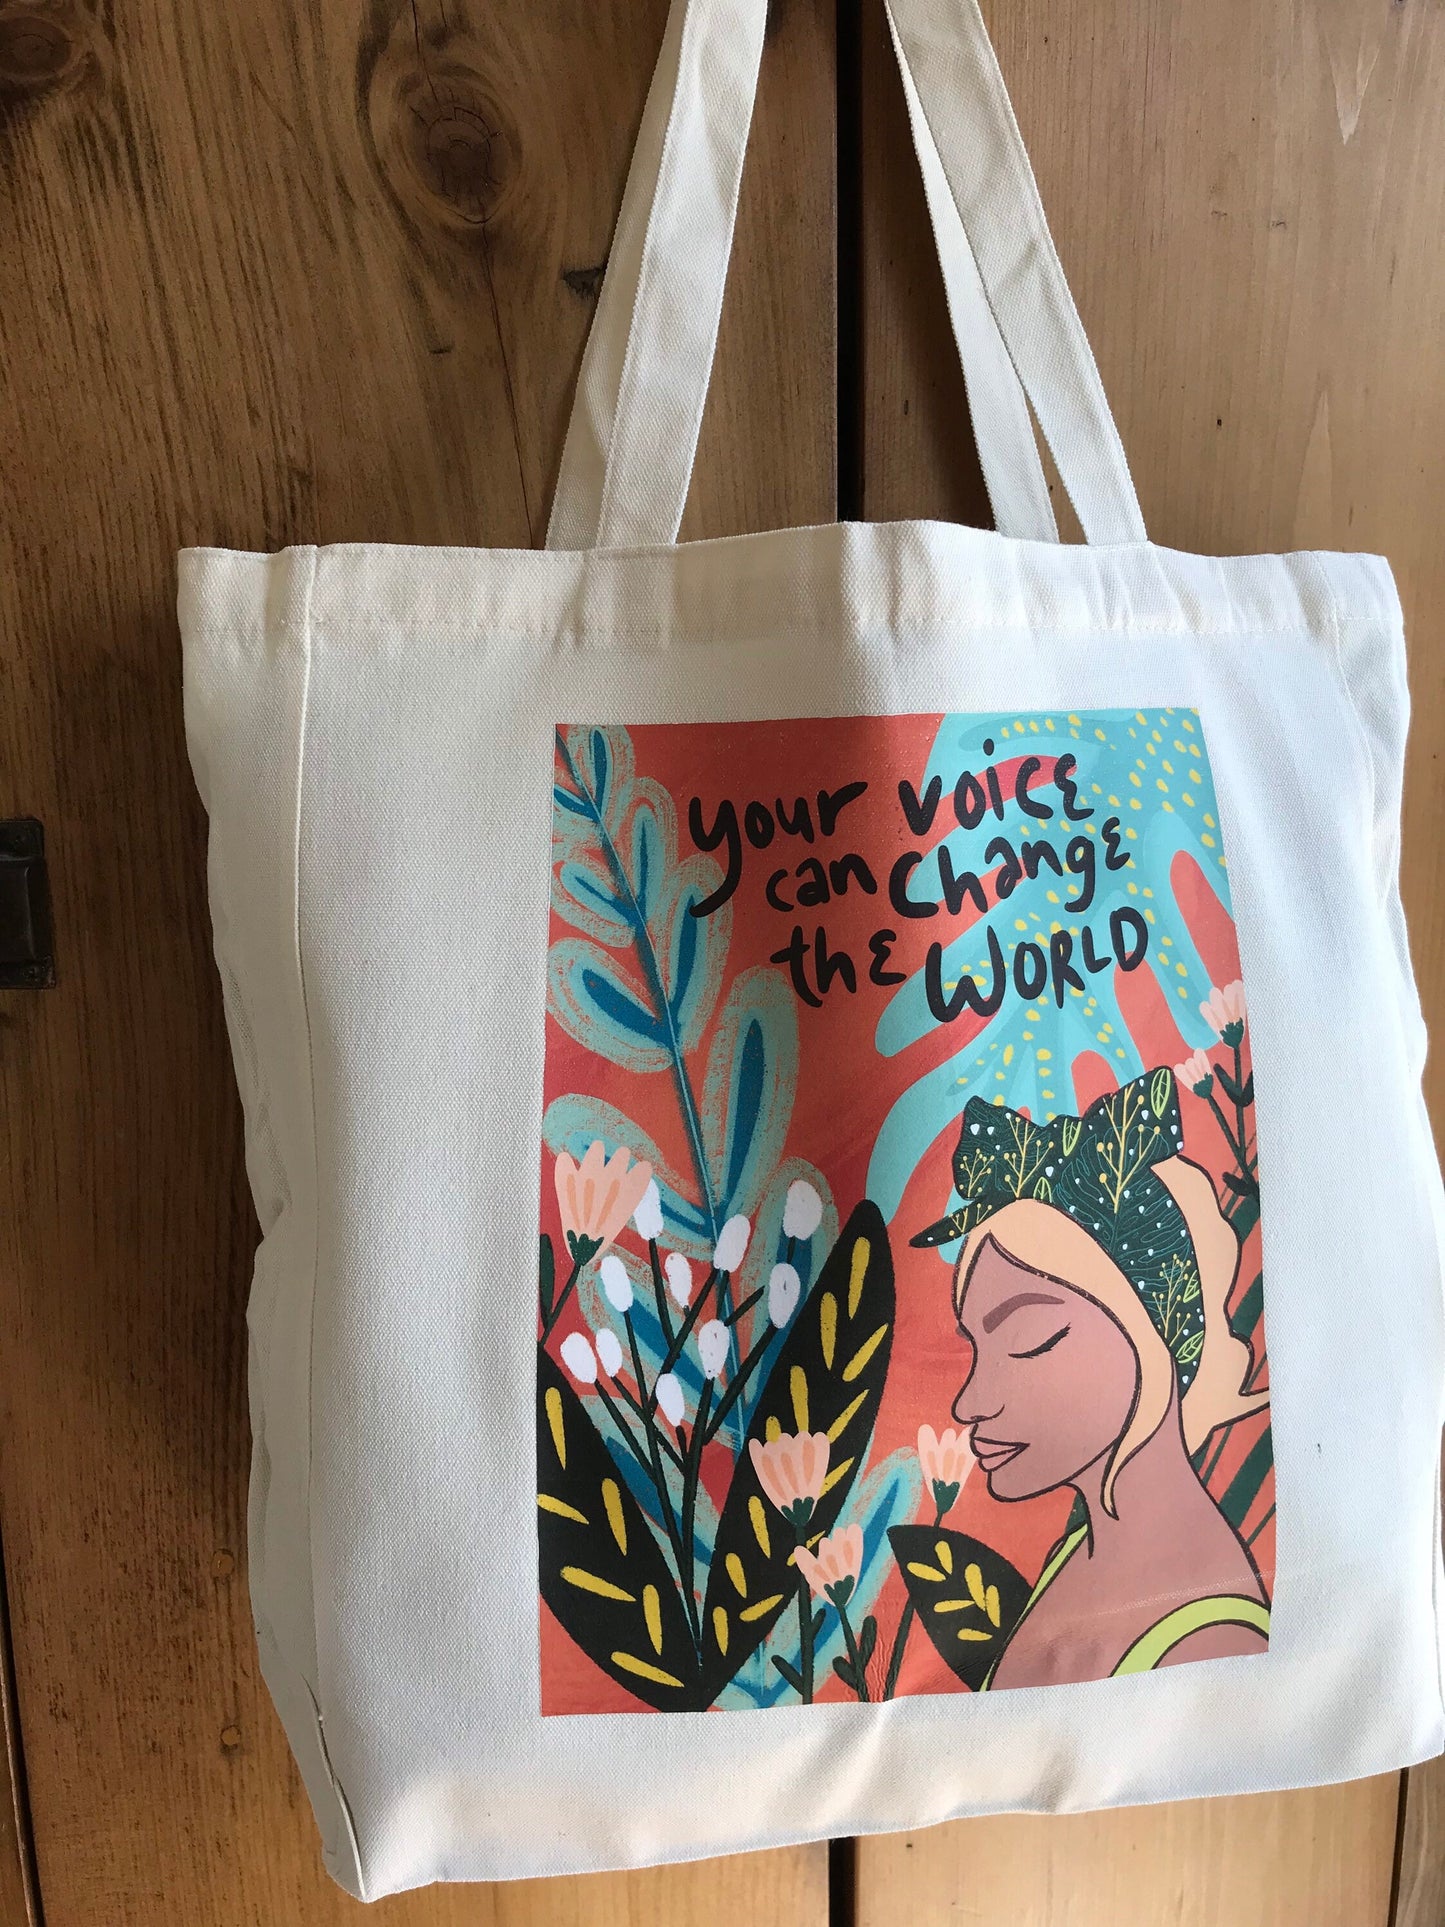 "Your Voice Can Change The World" Tote Bag